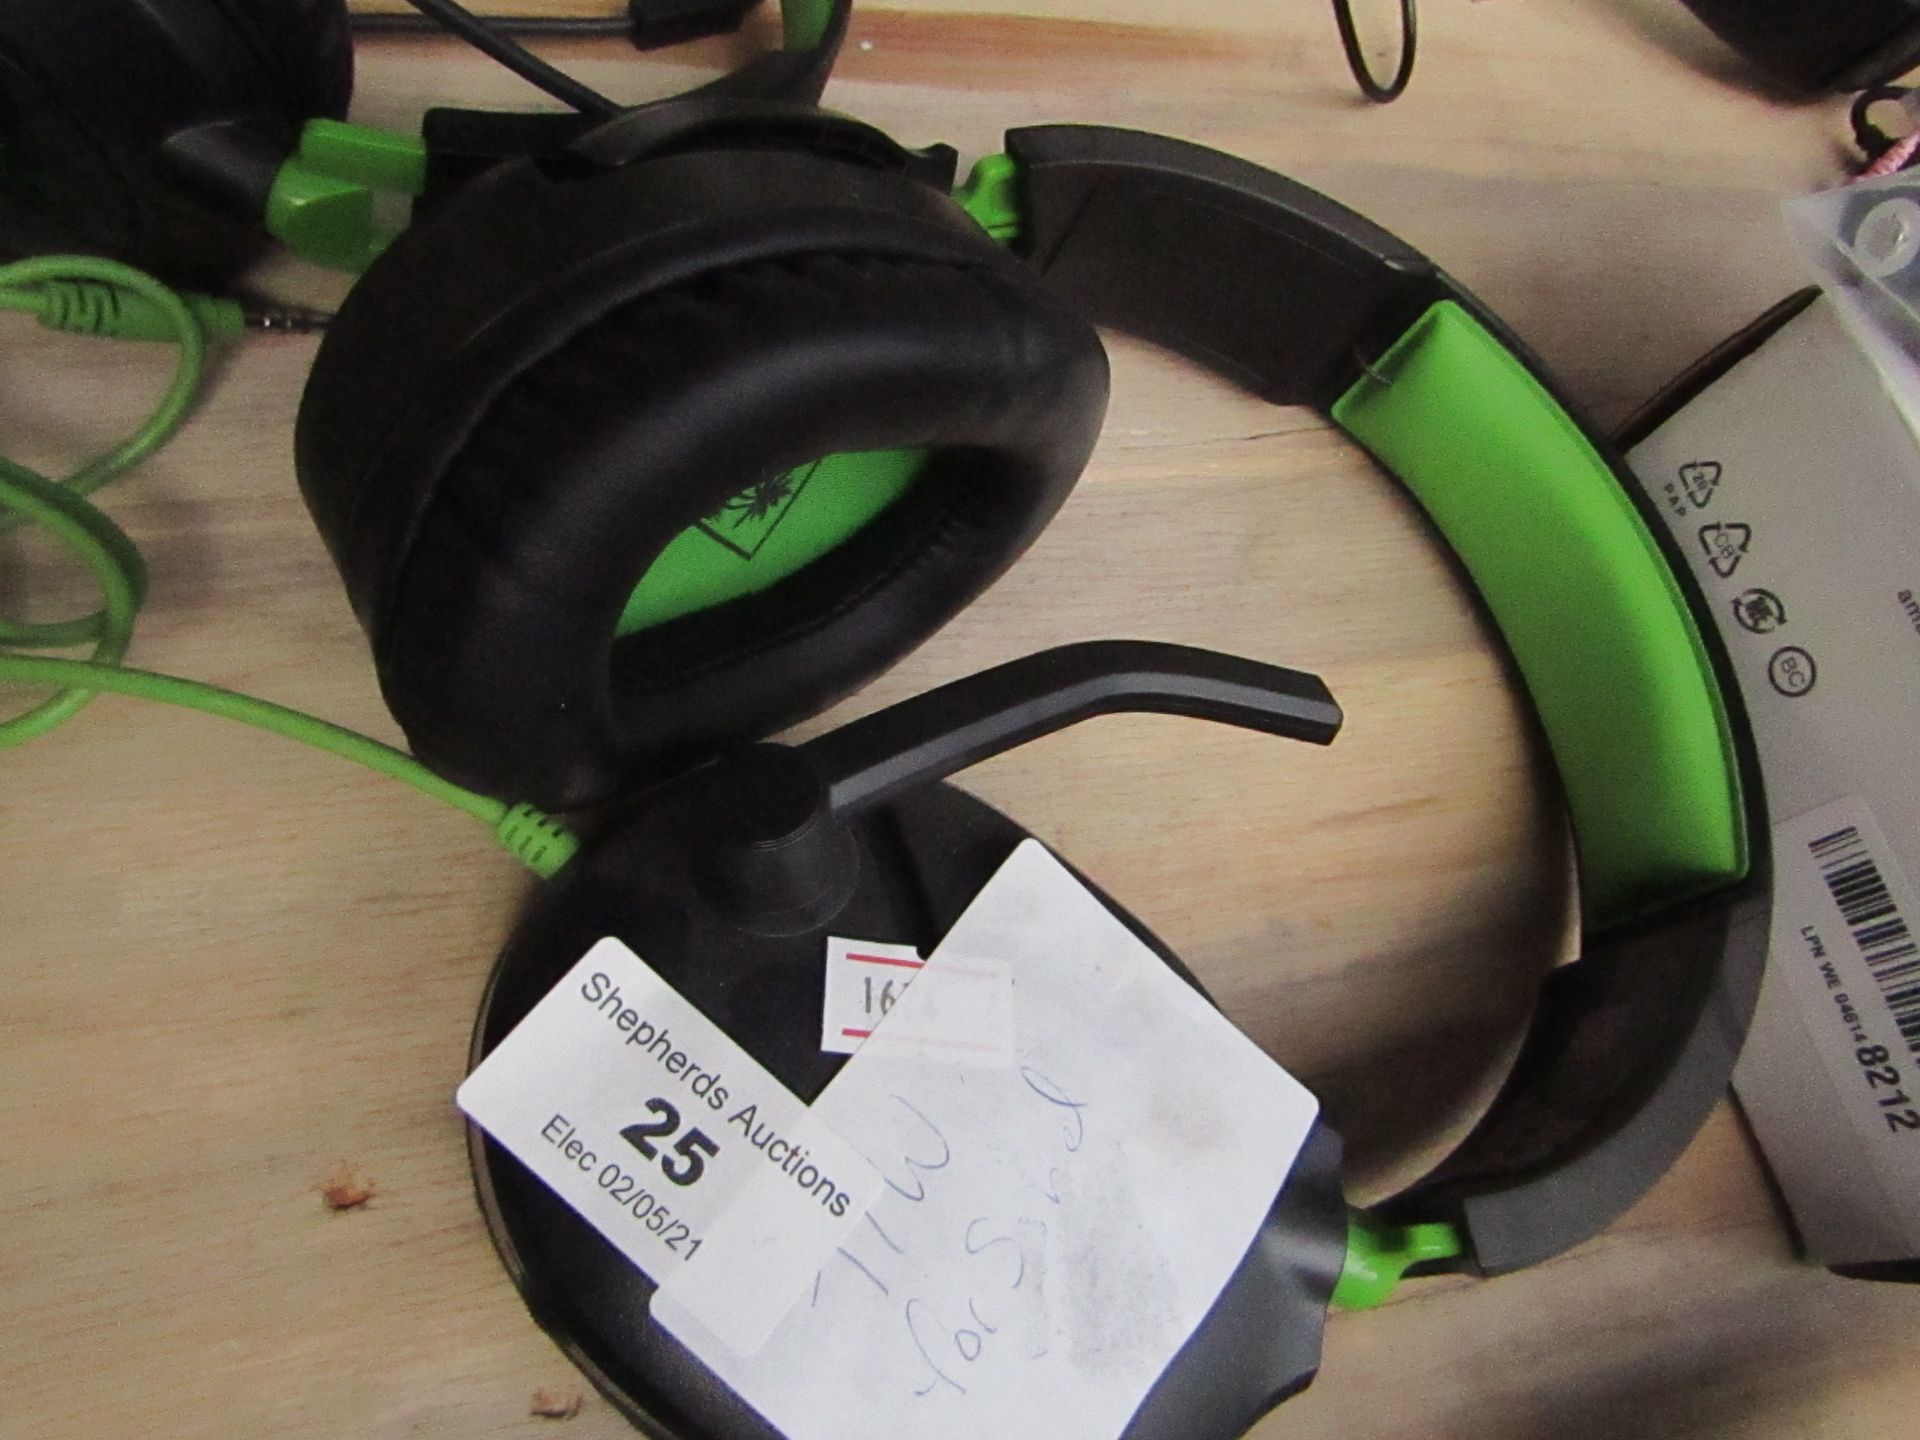 Turtle Beach Gaming Headset, Tested Working for Sound Only.